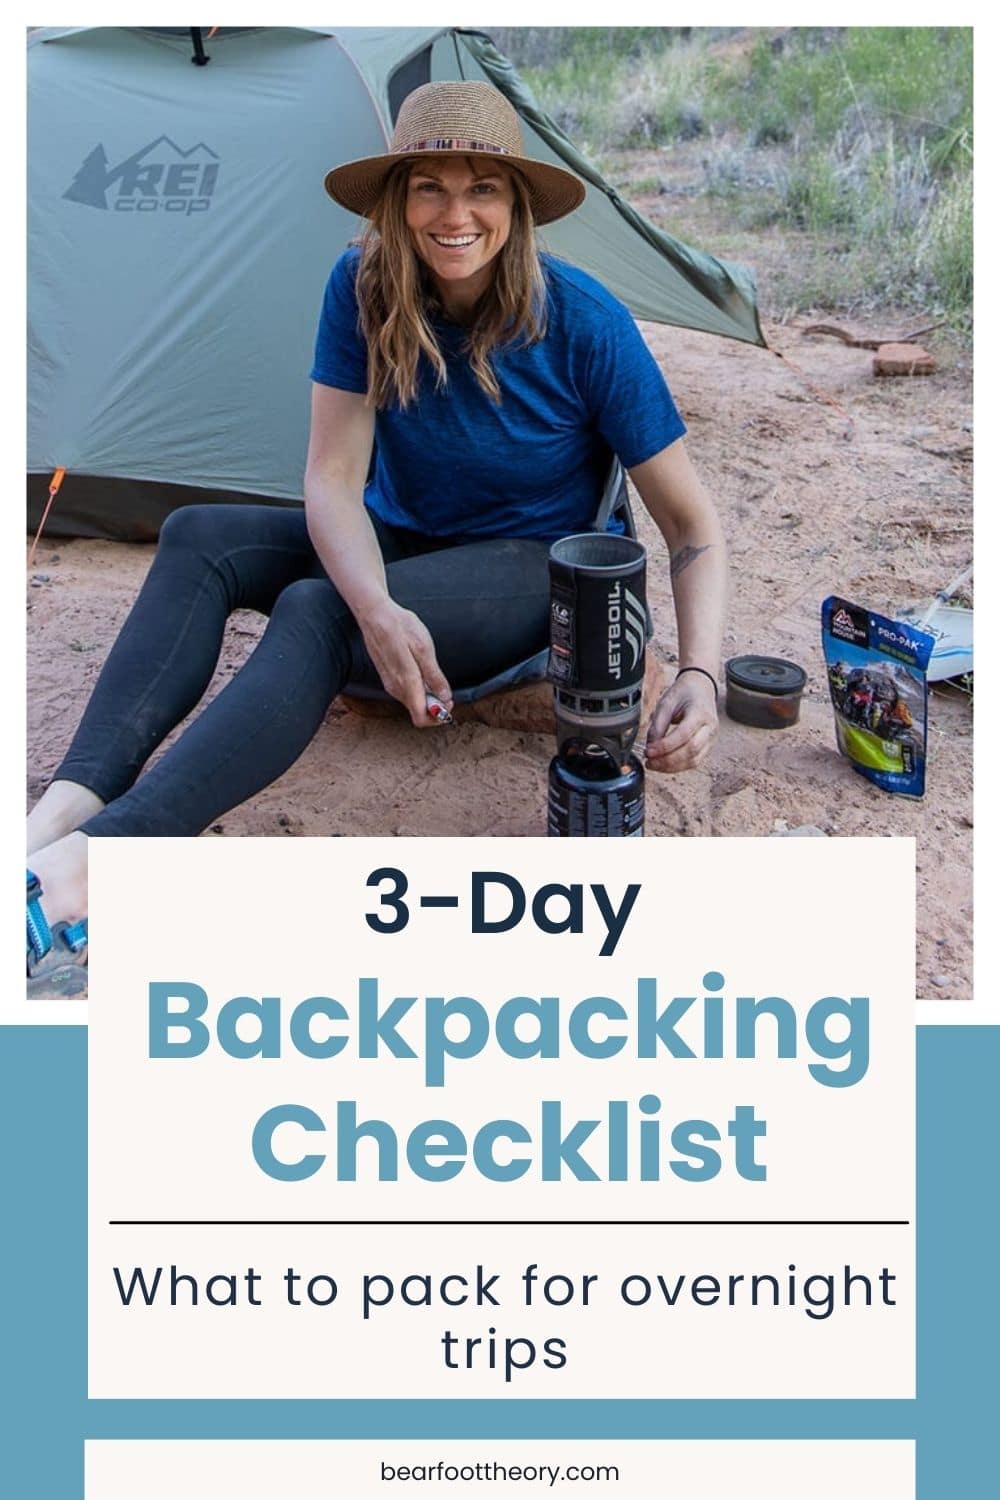 Bearfoot Theory | Get ready for your next outdoor adventure with this comprehensive 3-day backpacking checklist! From essential gear to practical clothing, our tried and true picks have you covered. Don't forget a thing and enjoy a stress-free journey into nature. Pin this checklist and start planning your next backpacking trip today!